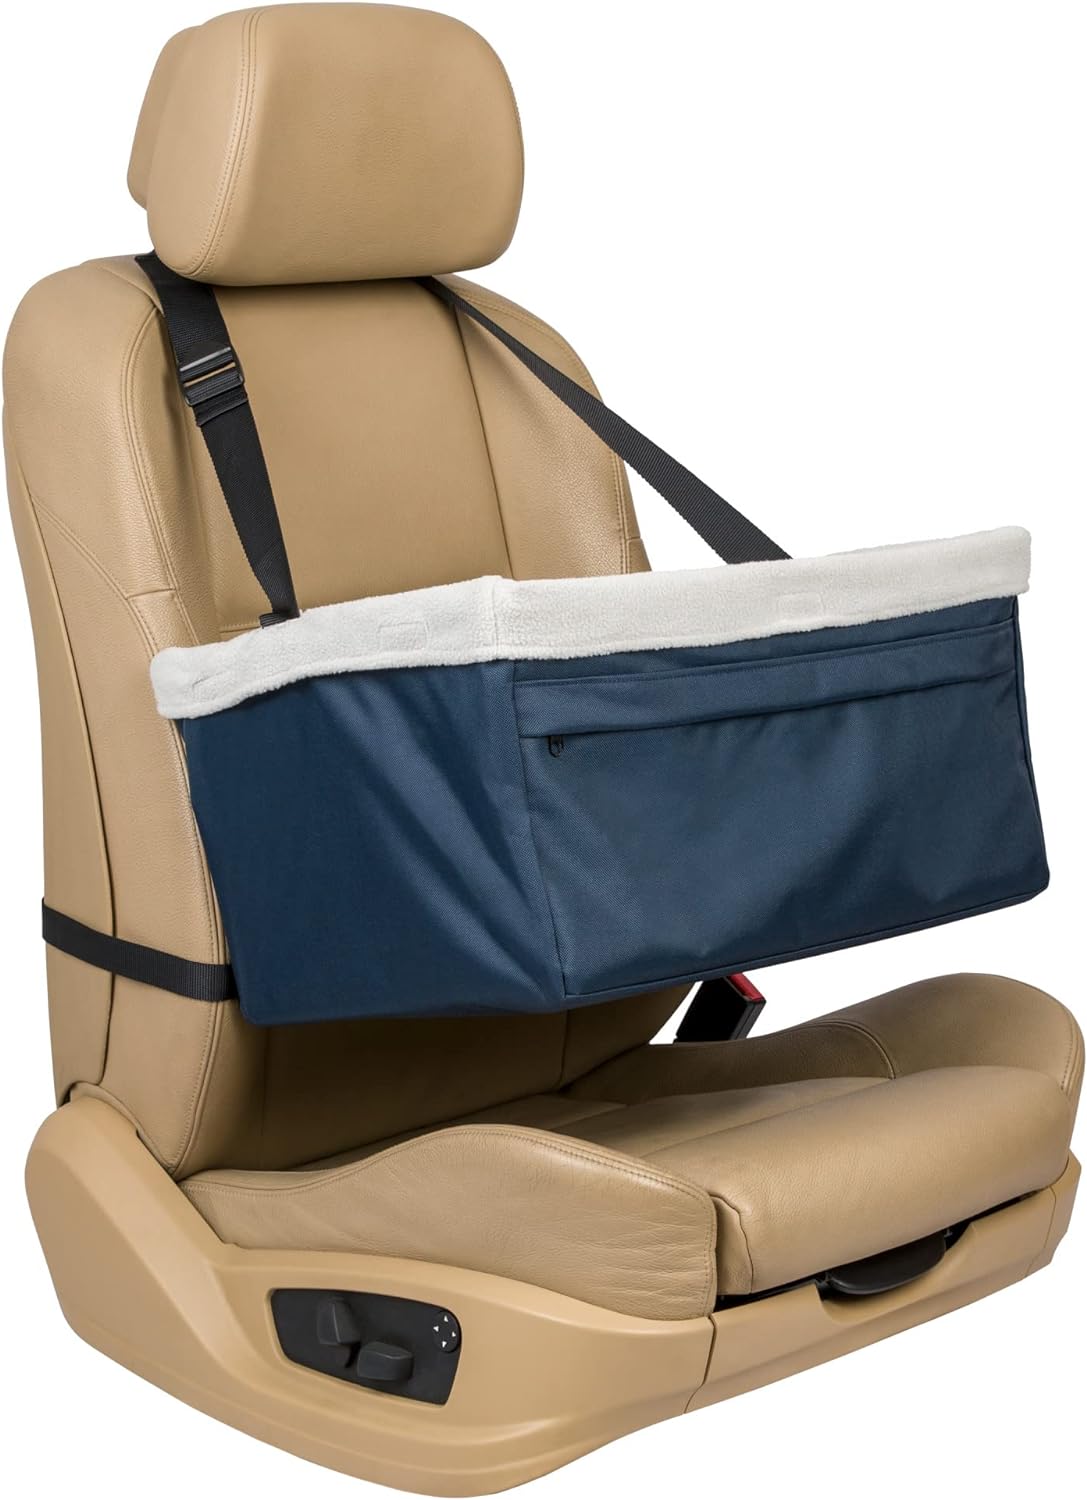 PetSafe Happy Ride Booster Seat - Dog Booster Seat for Cars, Trucks and SUVs - Easy to Adjust Strap - Durable Fleece Liner is Machine Washable and Easy to Clean - Extra Large, Navy